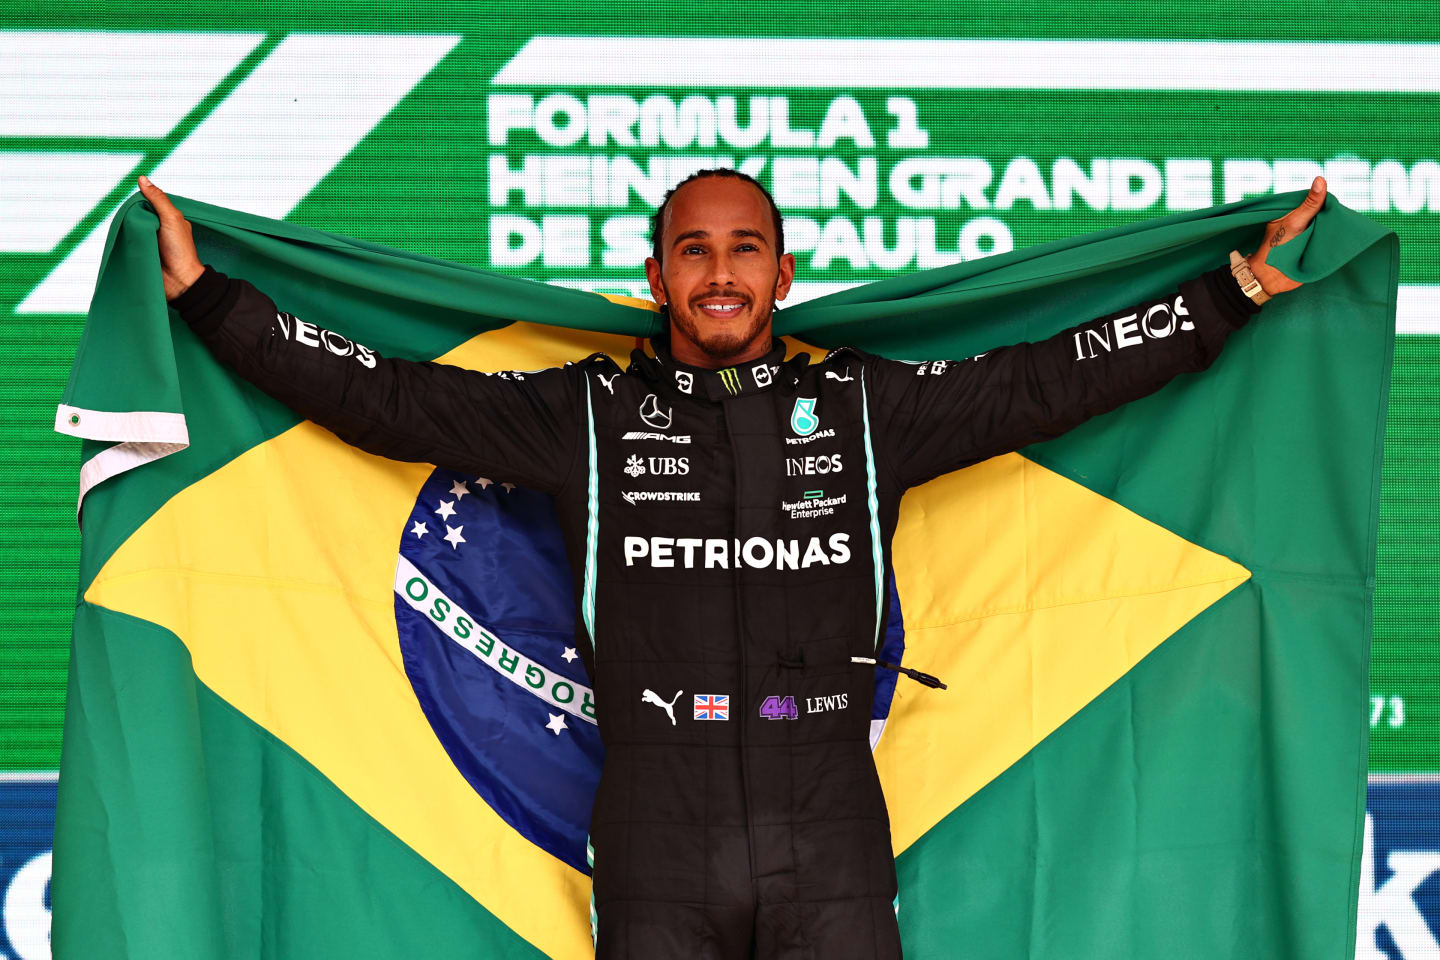 SAO PAULO, BRAZIL - NOVEMBER 14: Race winner Lewis Hamilton of Great Britain and Mercedes GP celebrates on the podium during the F1 Grand Prix of Brazil at Autodromo Jose Carlos Pace on November 14, 2021 in Sao Paulo, Brazil. (Photo by Mark Thompson/Getty Images)